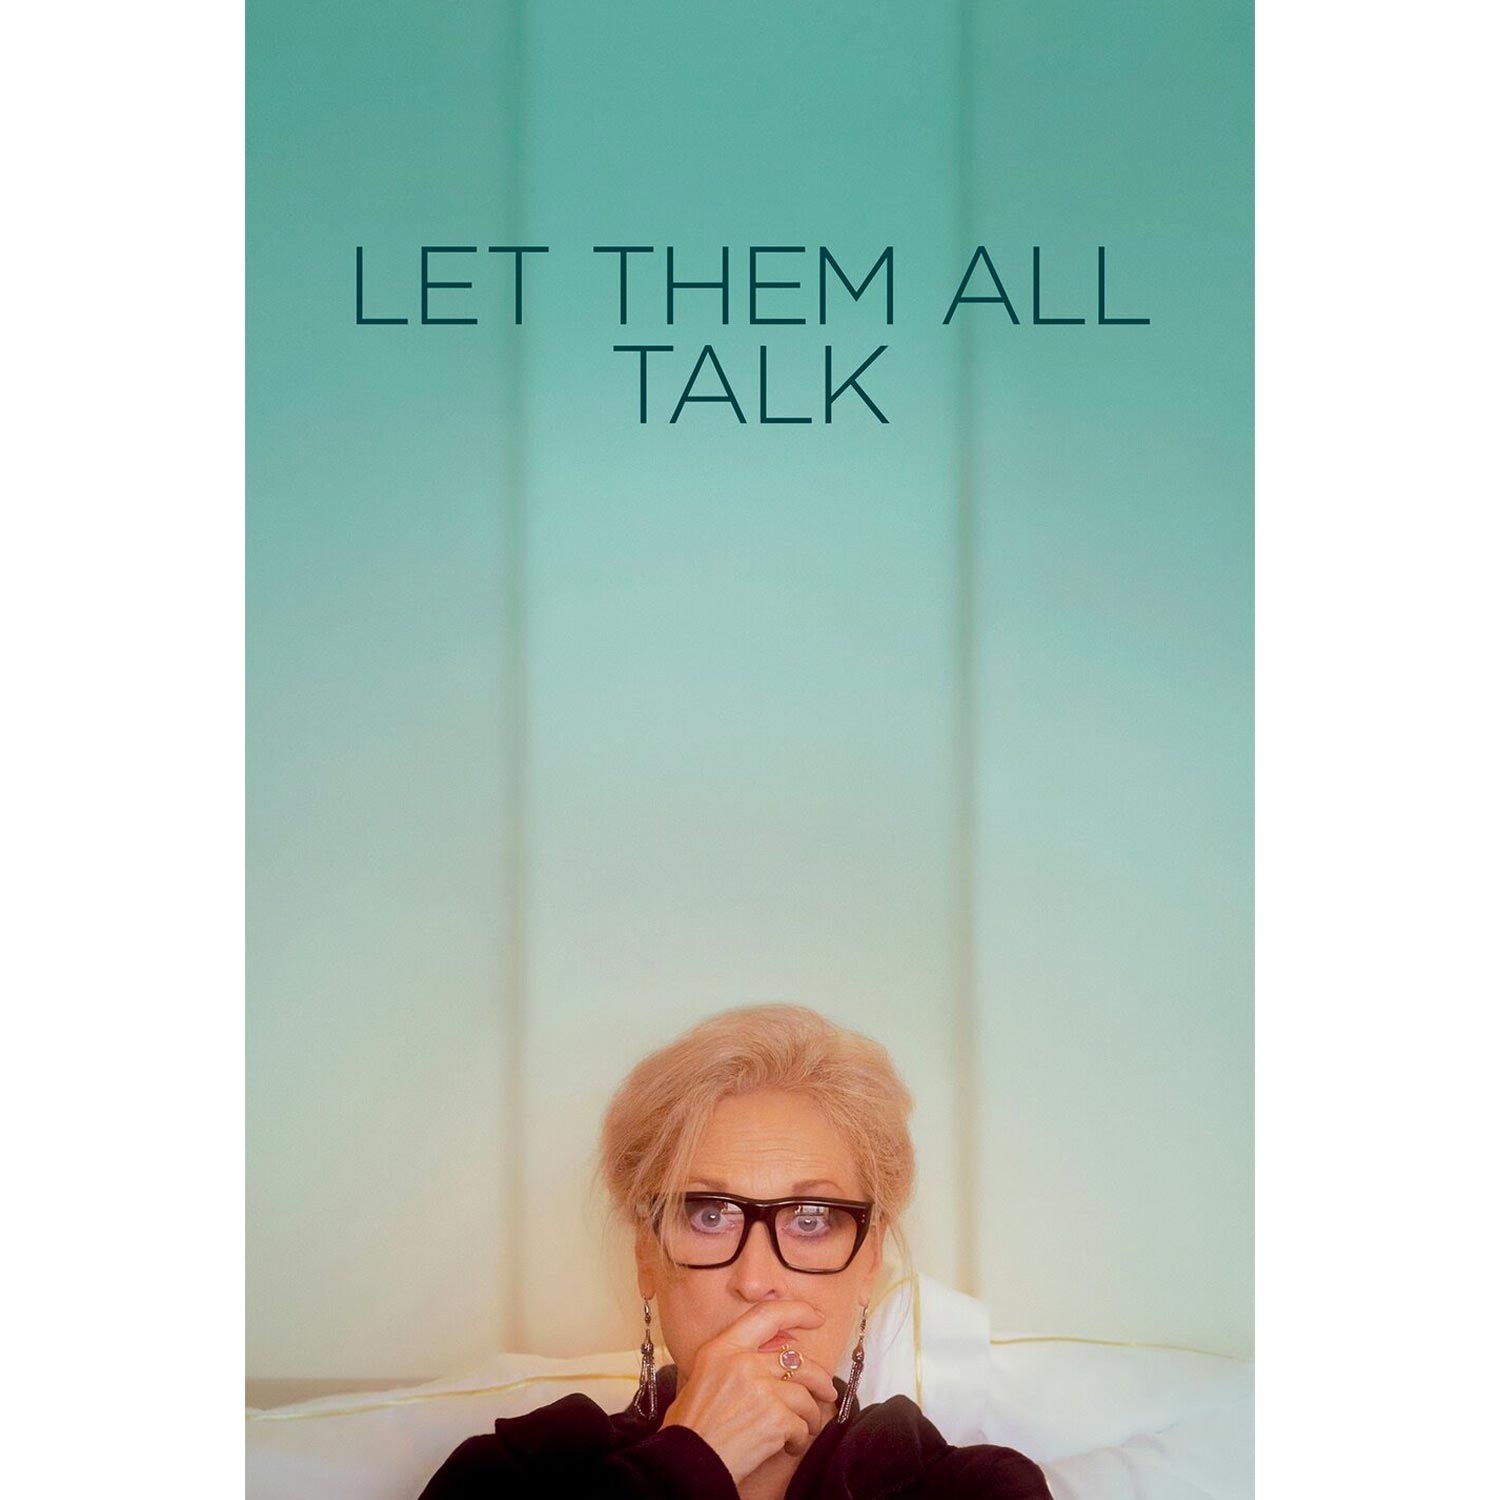 The poster for Let Them All Talk.